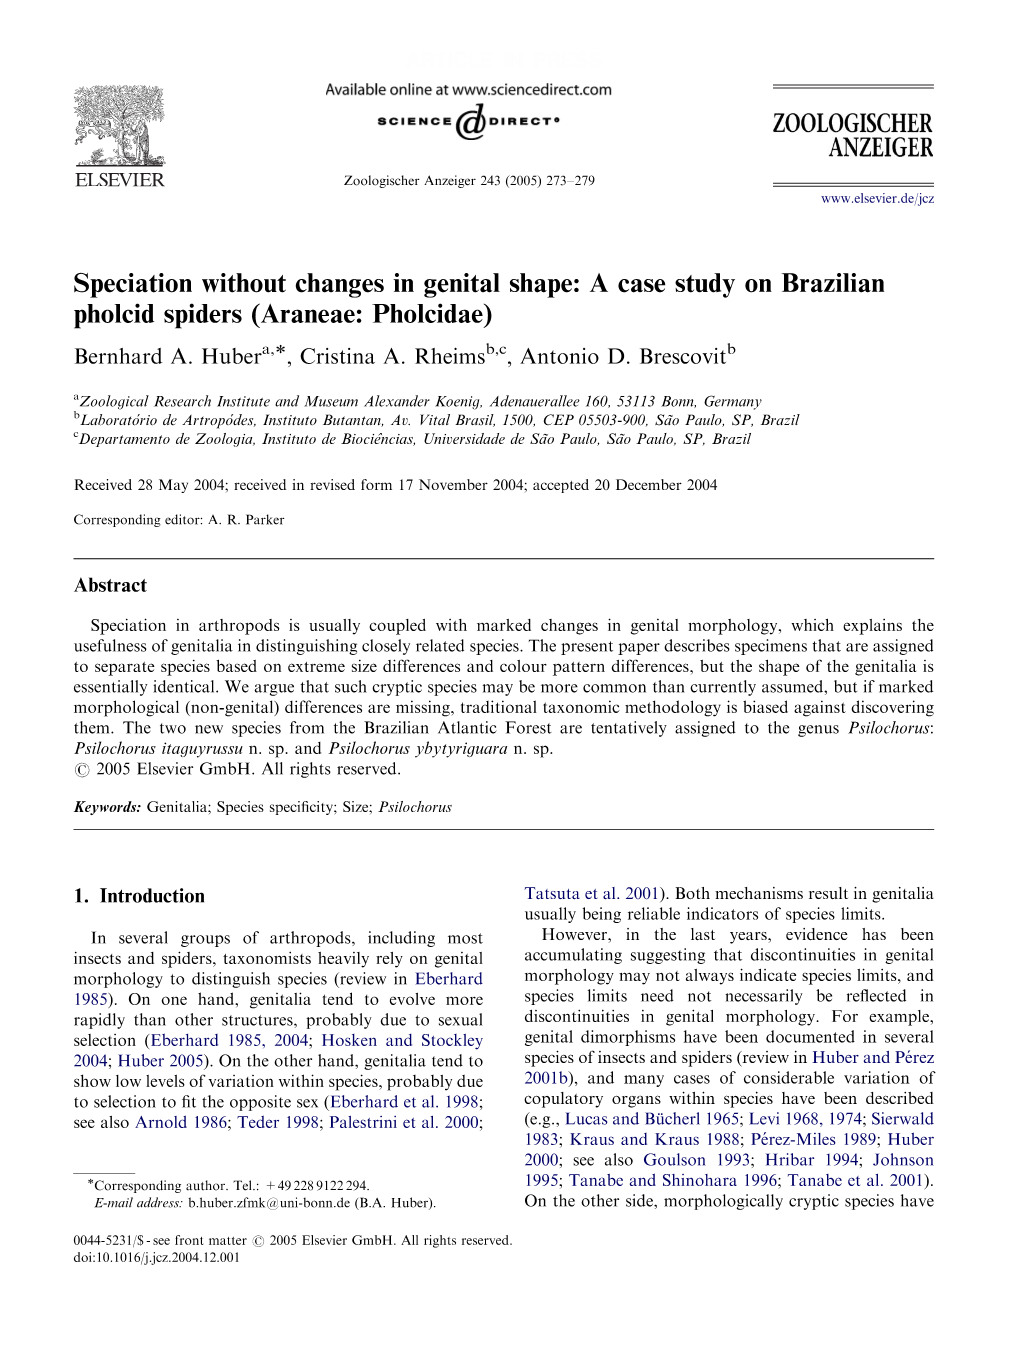 Speciation Without Changes in Genital Shape: a Case Study on Brazilian Pholcid Spiders (Araneae: Pholcidae) Bernhard A